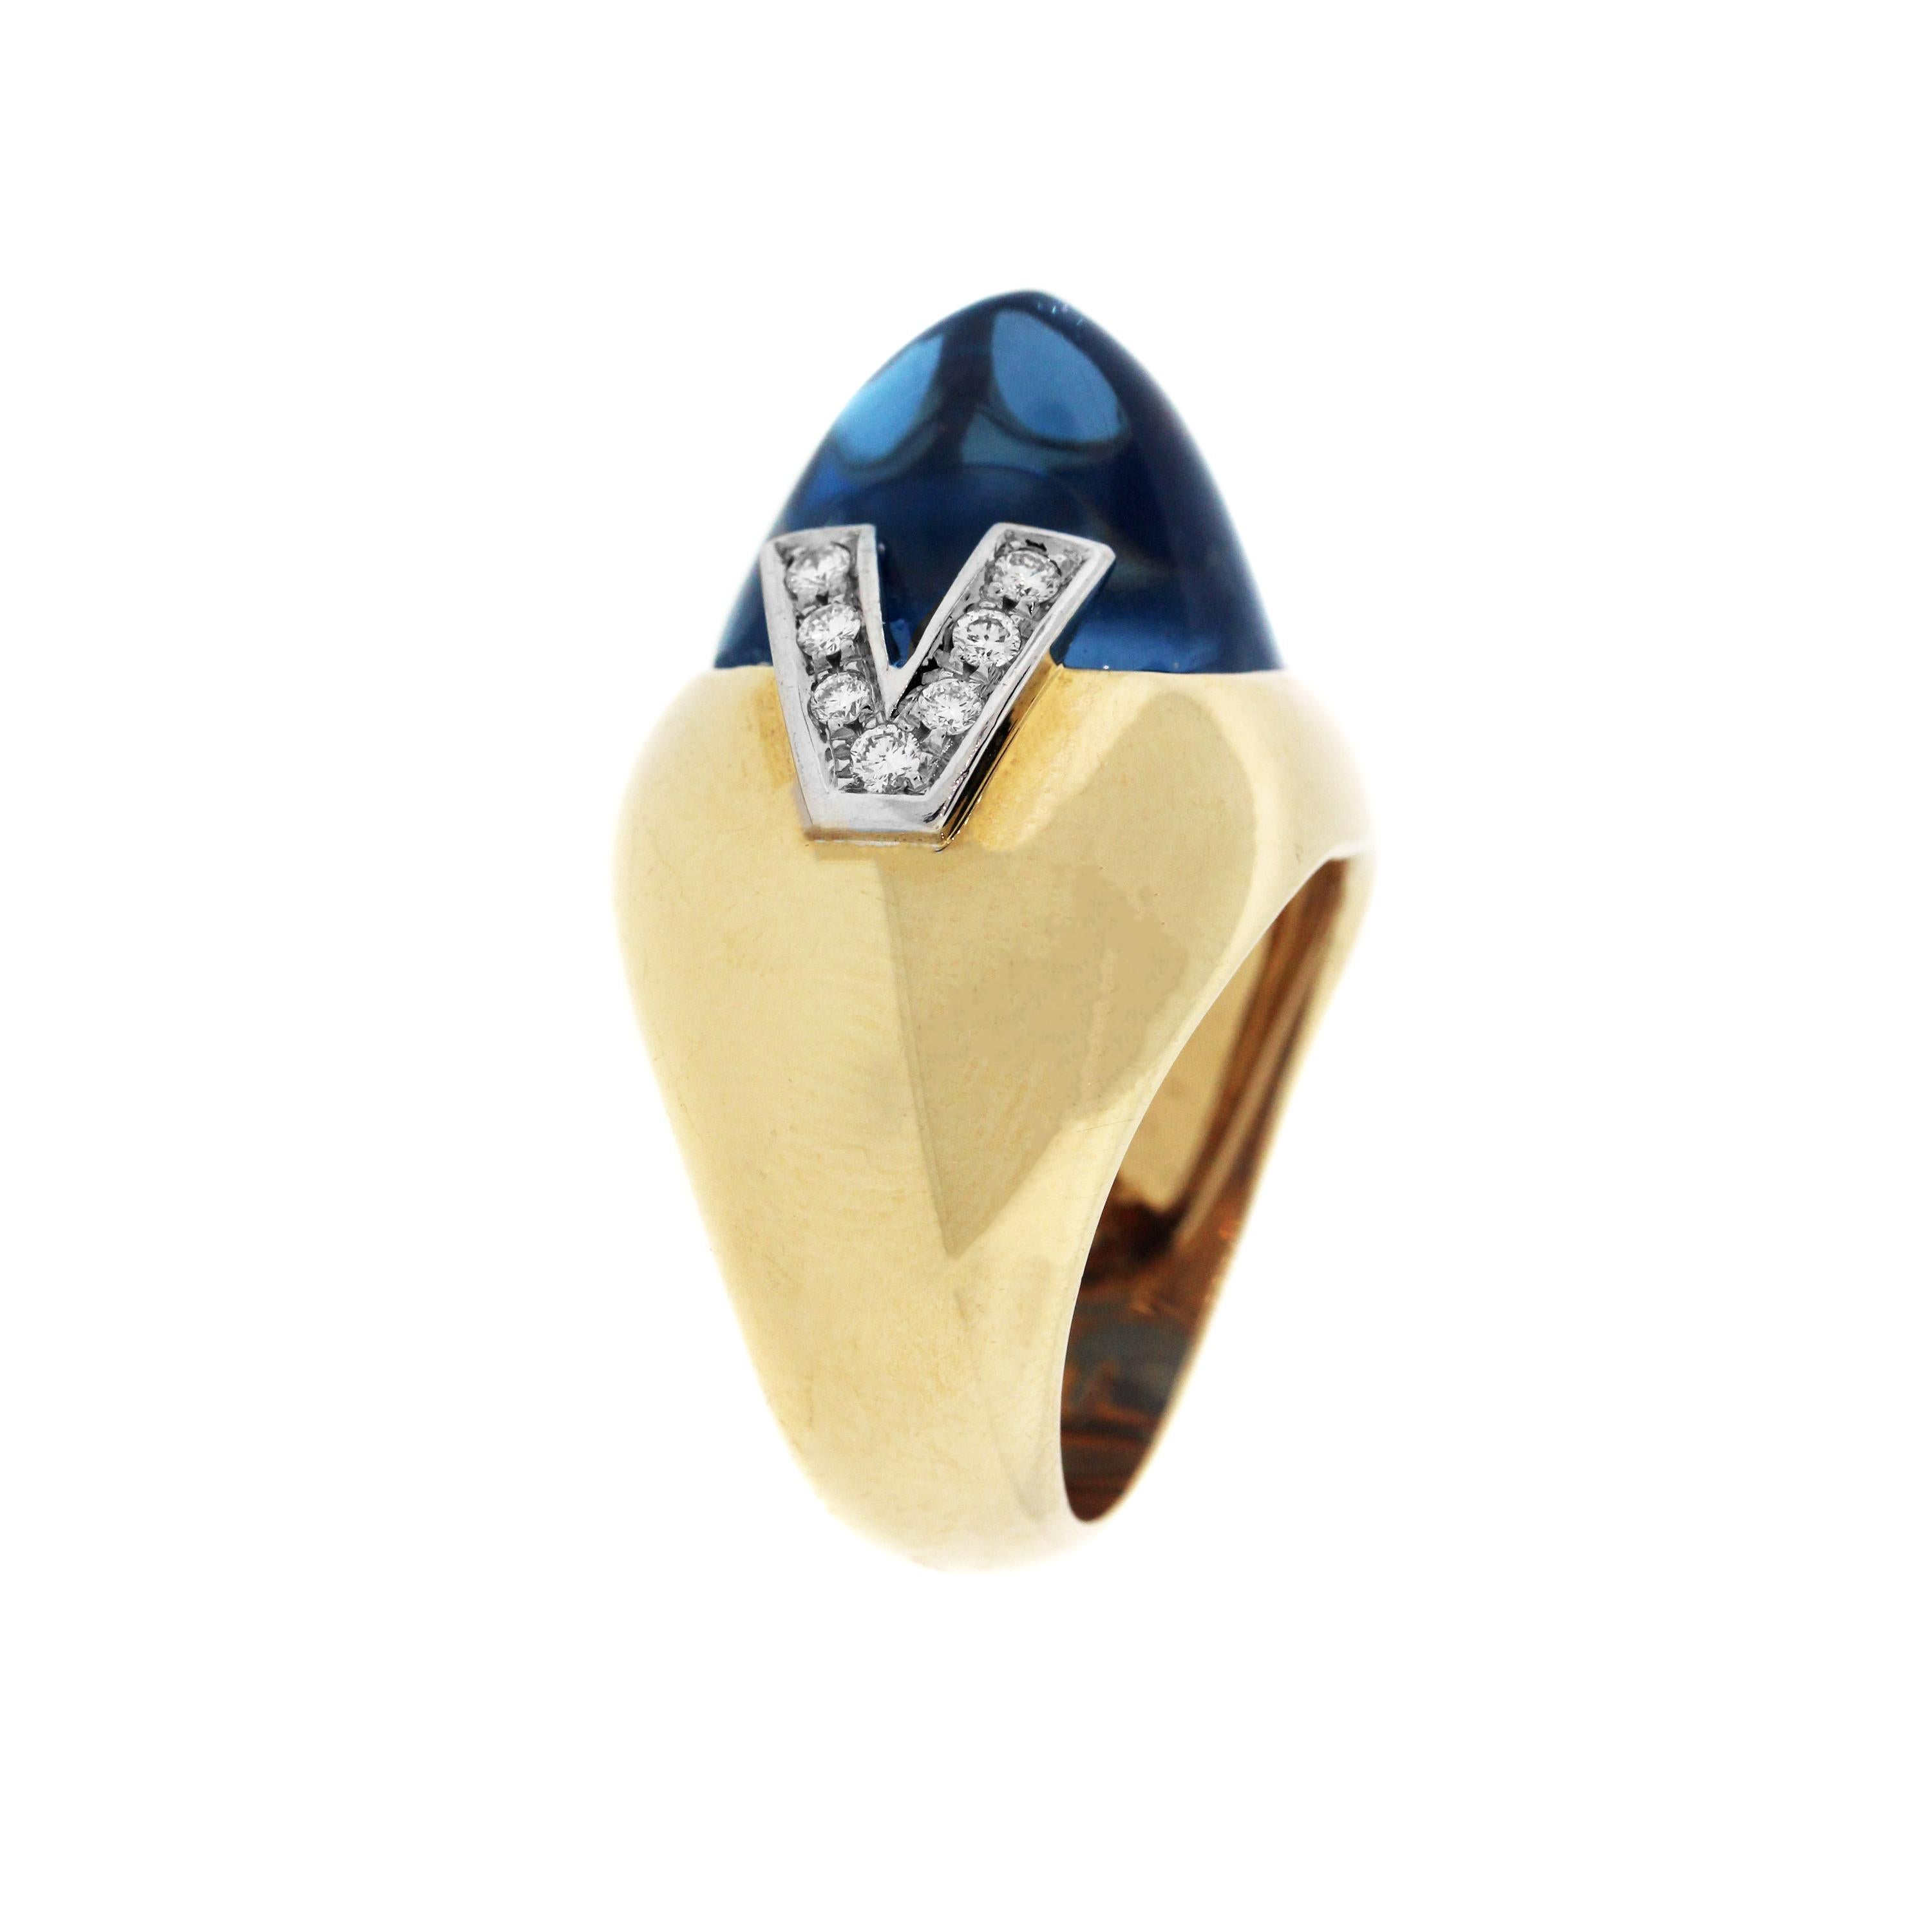 18K Yellow Gold Ring with Blue Topaz center and Diamonds

Center Blue Topaz apprx. 28 carat

Two symmetrical V's are seen on both sides of ring with round diamonds 0.37ct.  

Very rare design

Face of ring is 0.8 inch width. Band width is 0.4